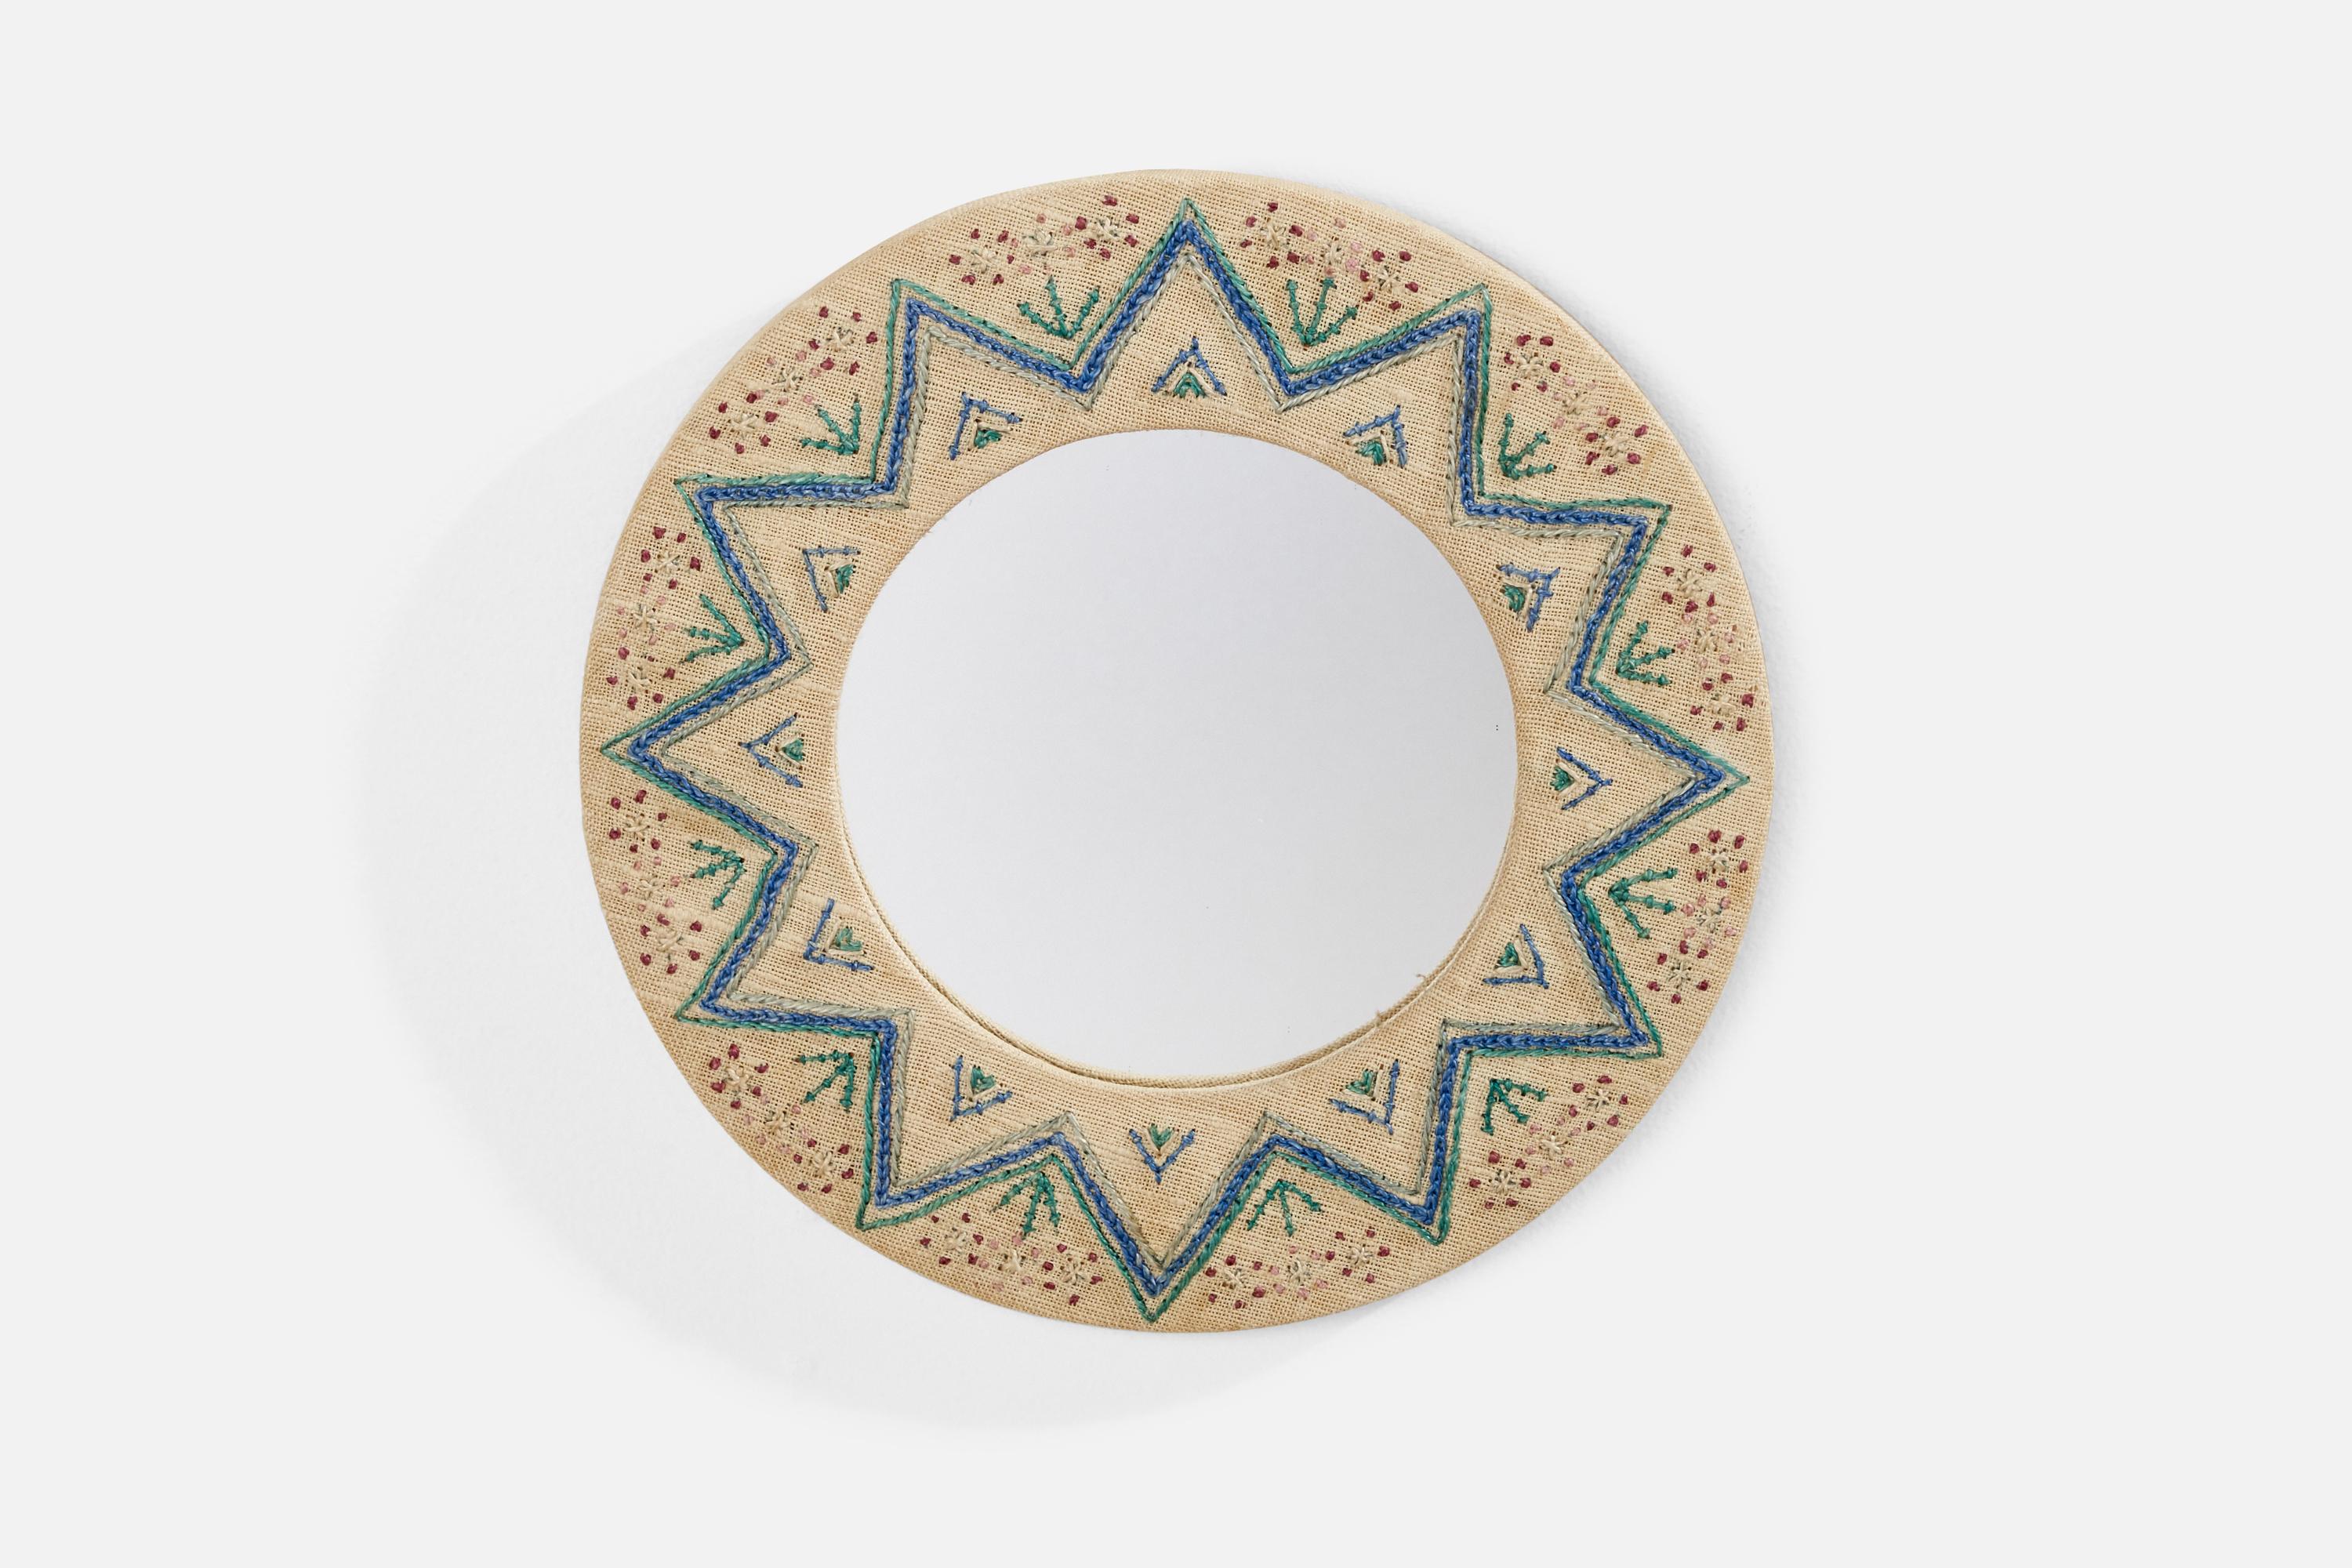 A small hand-embroidered fabric wall mirror designed and produced in Sweden, c. 1970s.